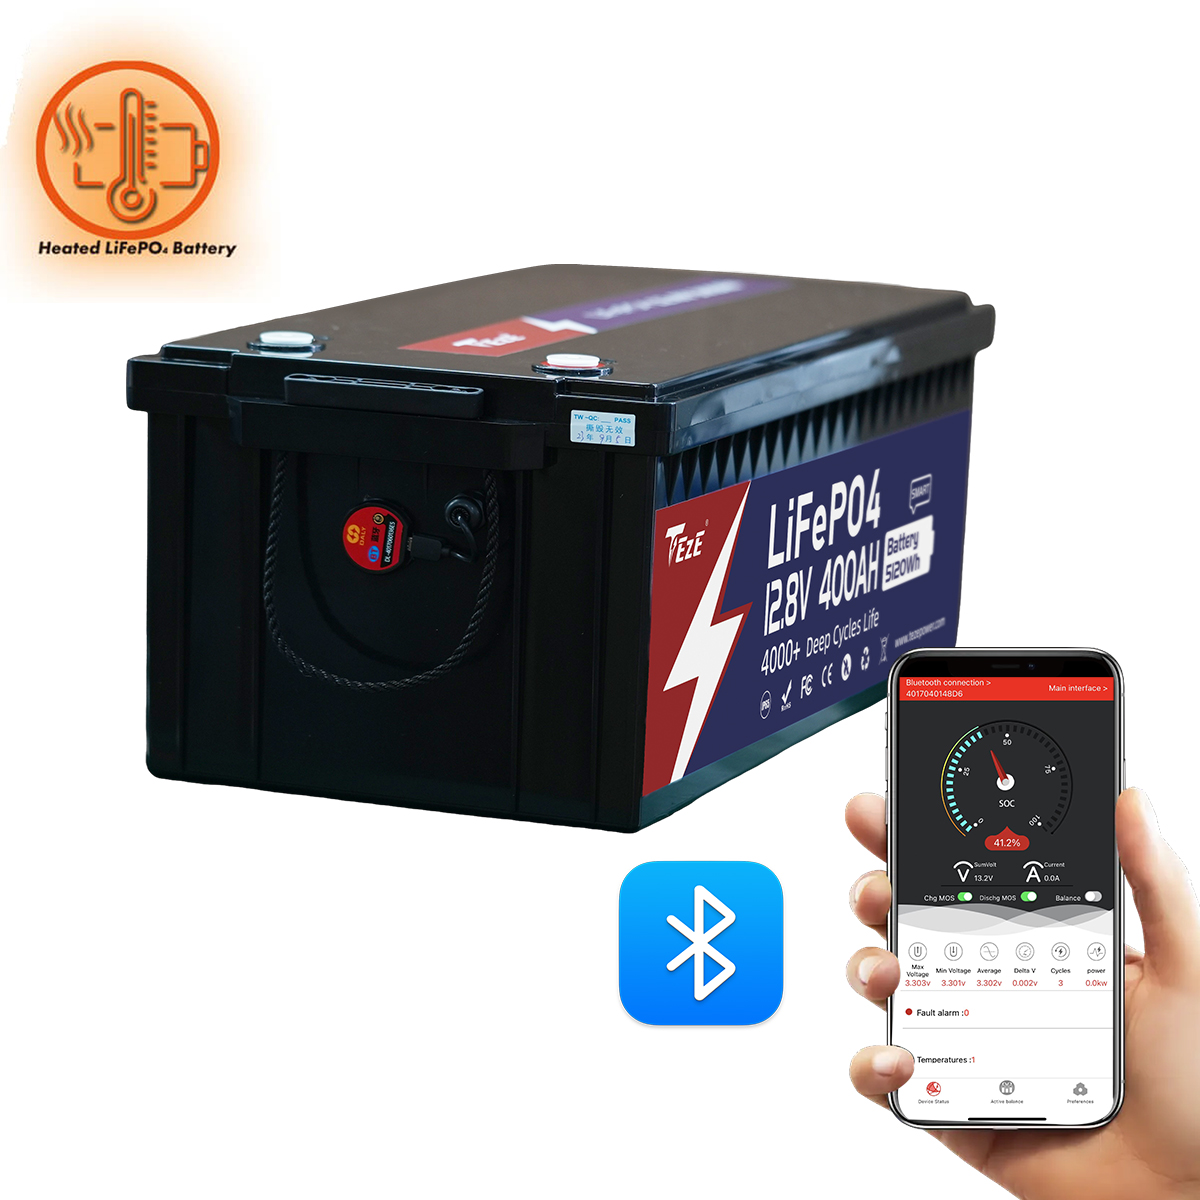 NEW-TezePower 12V400Ah LiFePO4 Battery with Bluetooth, Self-heating and Active Balancer, Built-in 250A Daly BMS (Bluetooth External Version)-TezePower